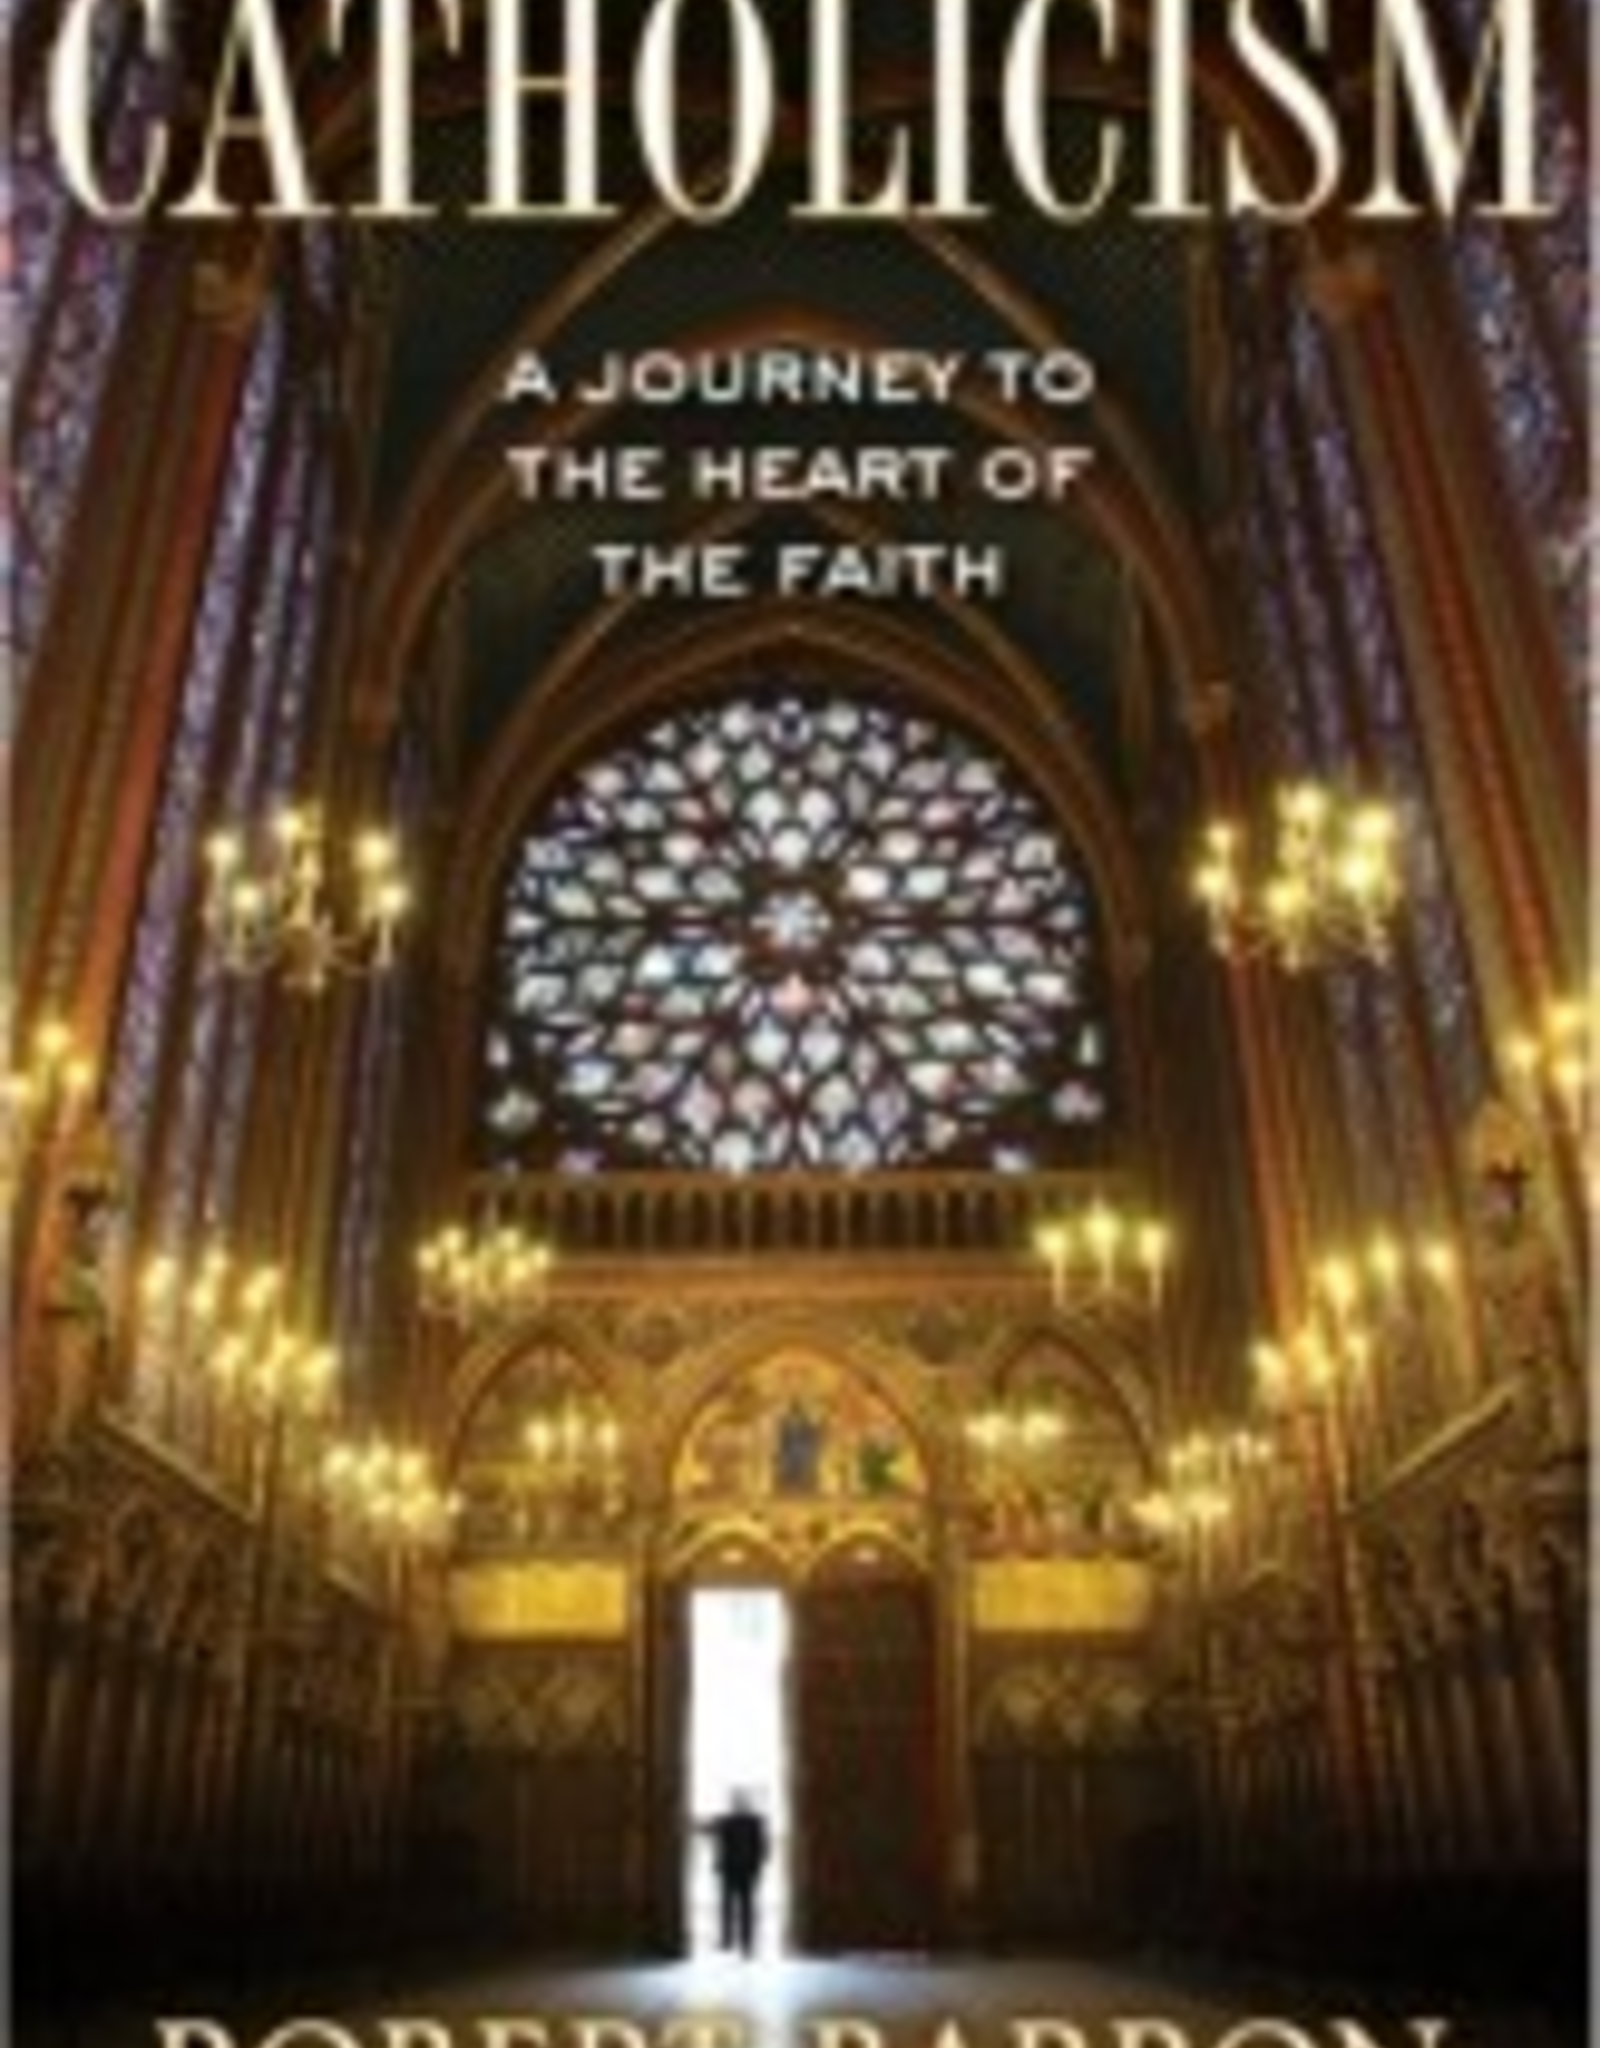 Random House Catholicism: A Journey to the Heart of the Faith, by  Father Robert Barron ( hardcover)